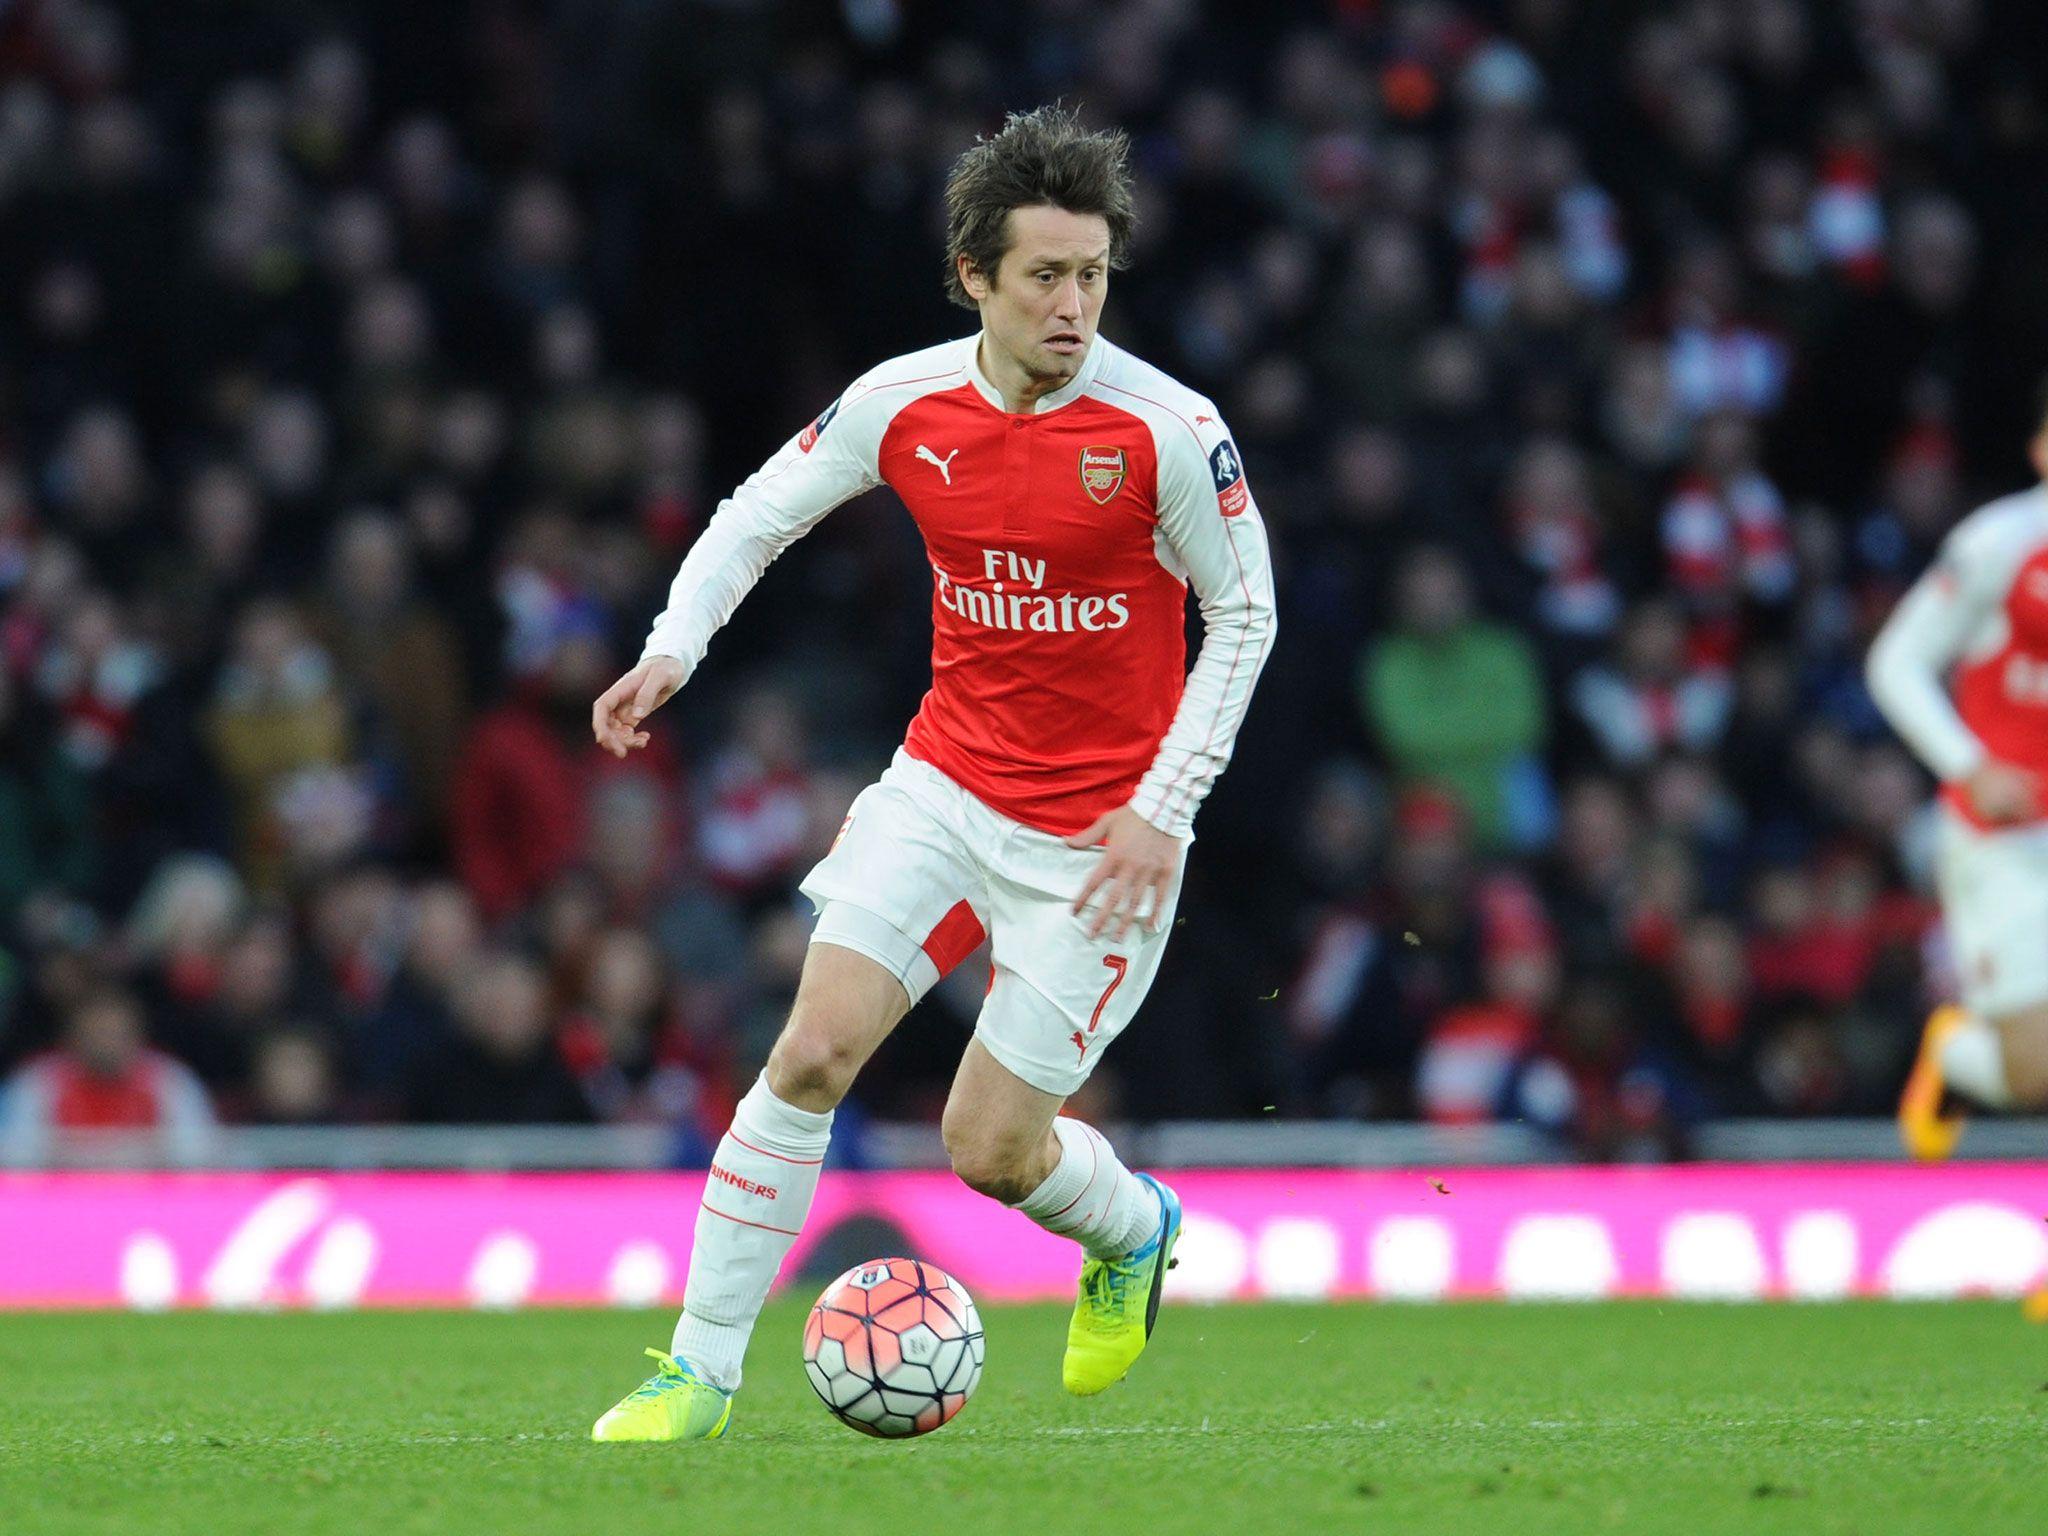 Ex Arsenal Star Tomas Rosicky Retires From Football